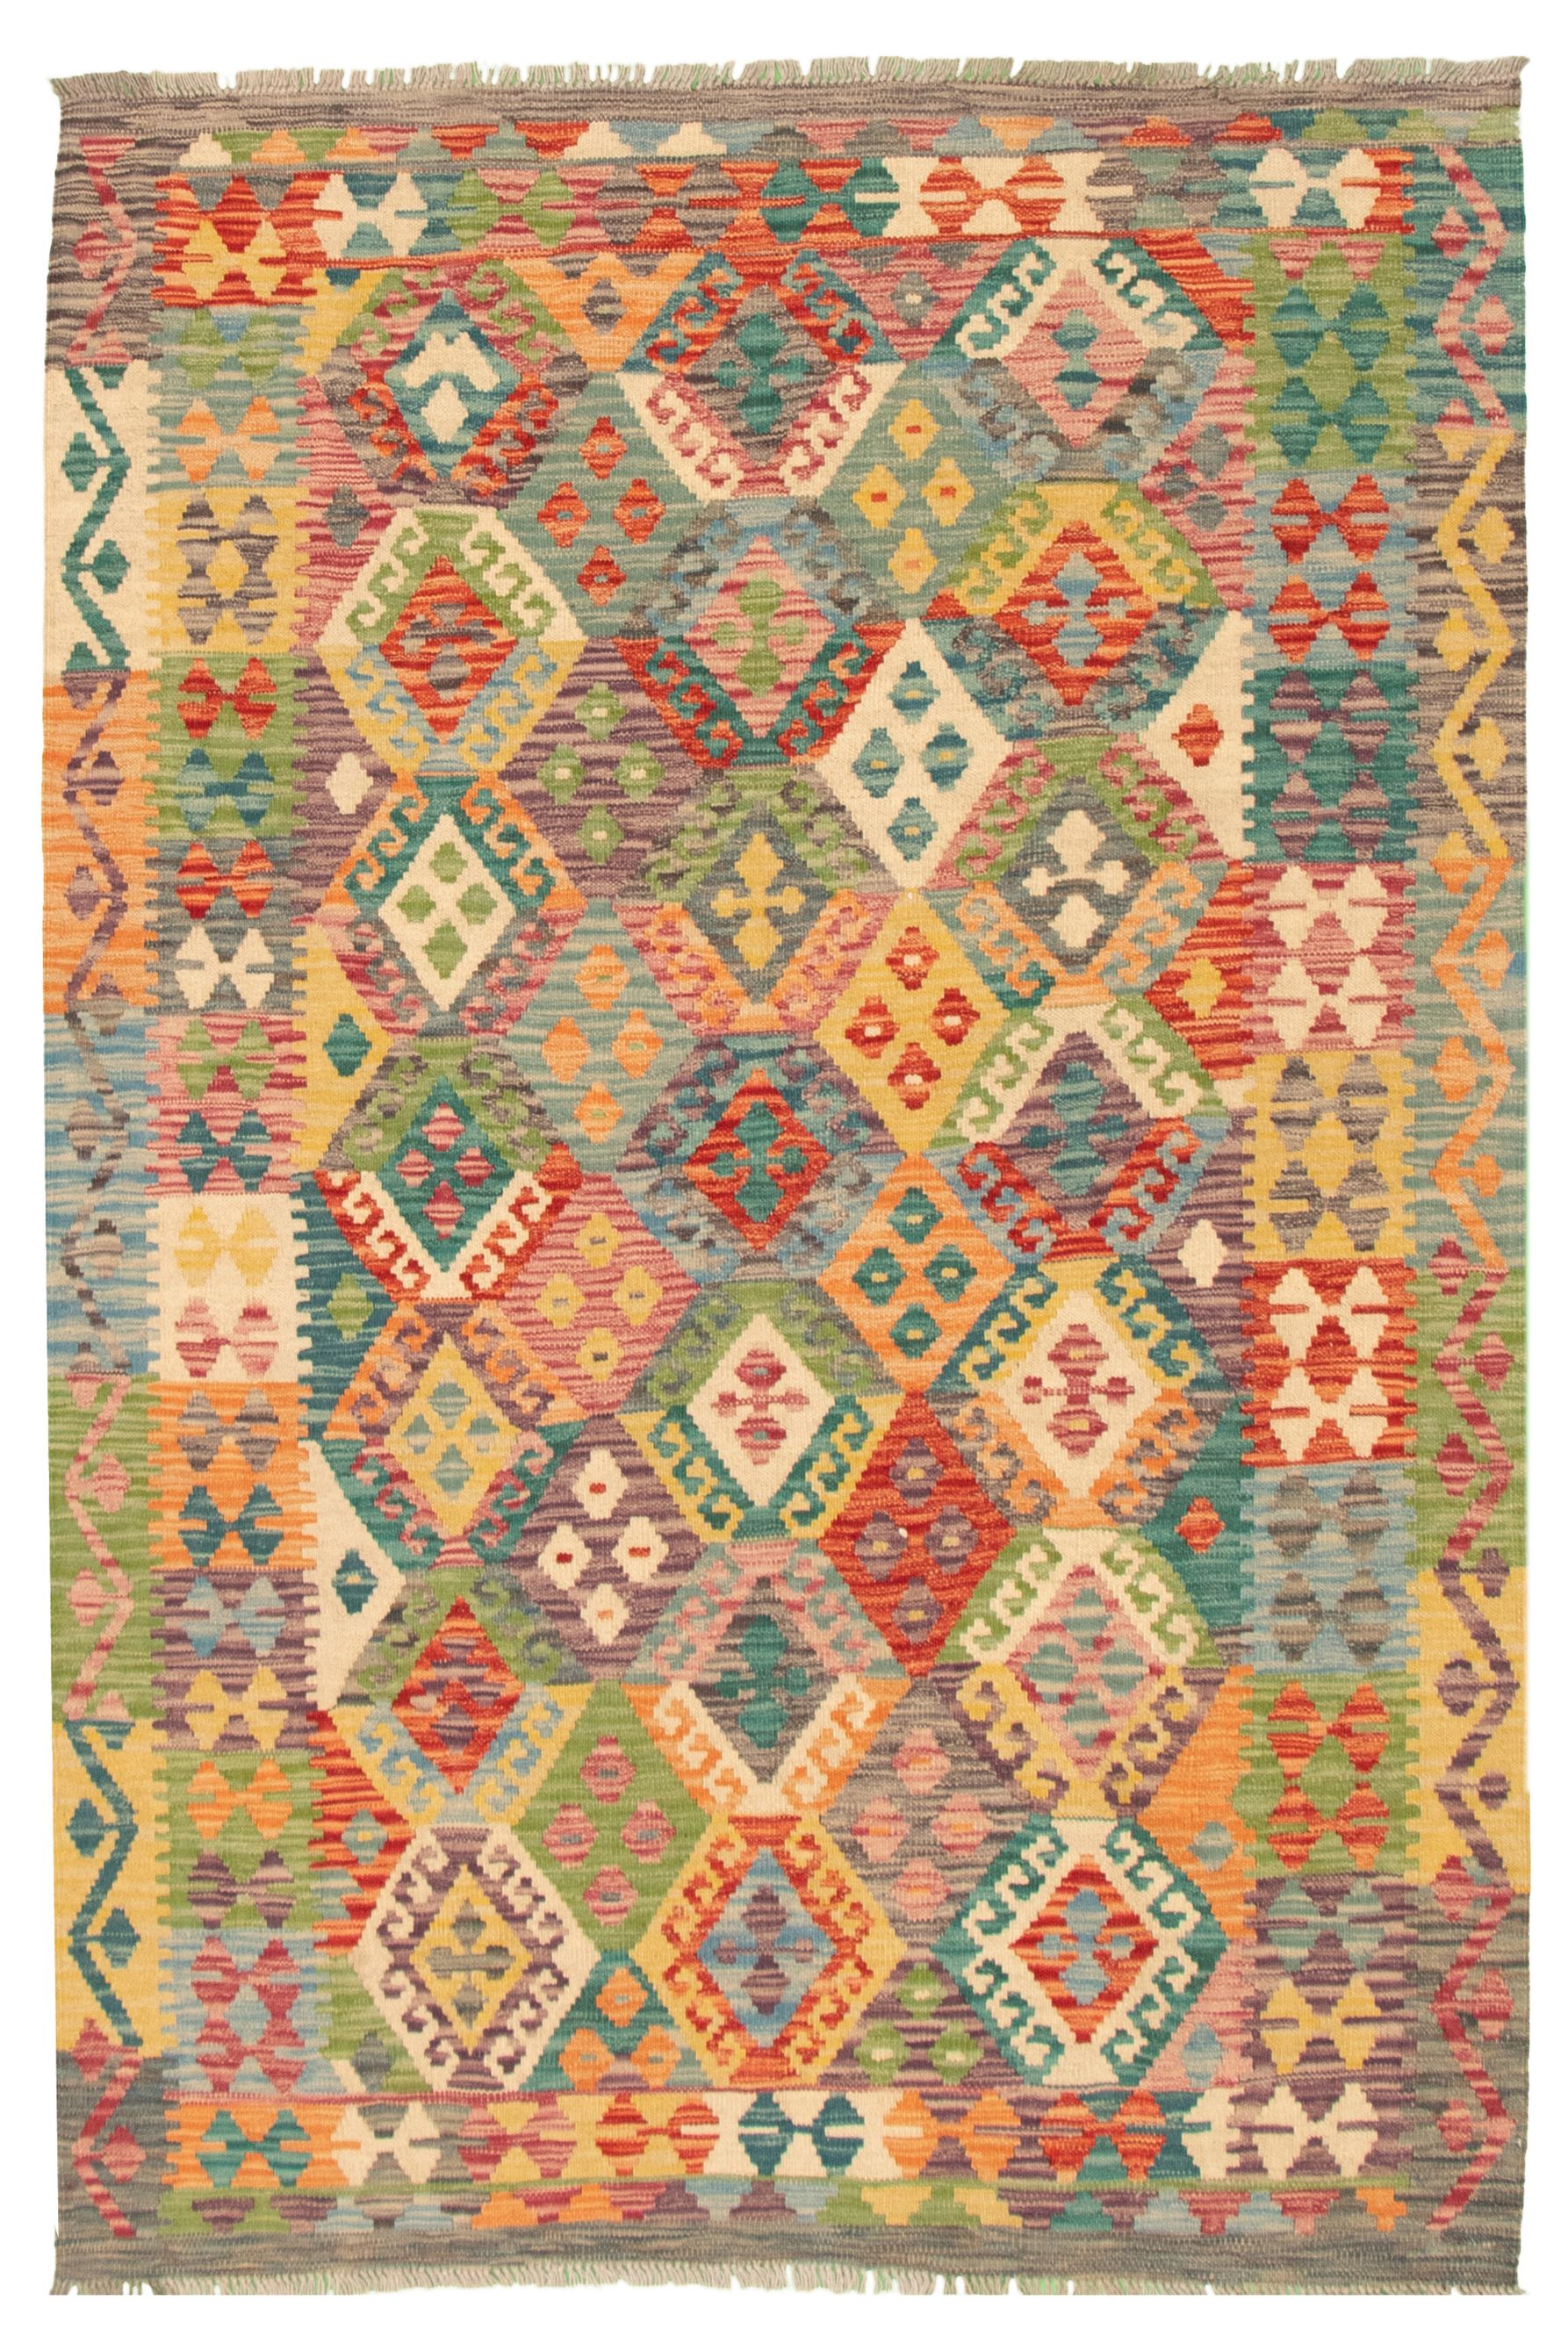 Hand woven Bold and Colorful  Multi Color Wool Kilim 5'2" x 6'9"  Size: 5'2" x 6'9"  